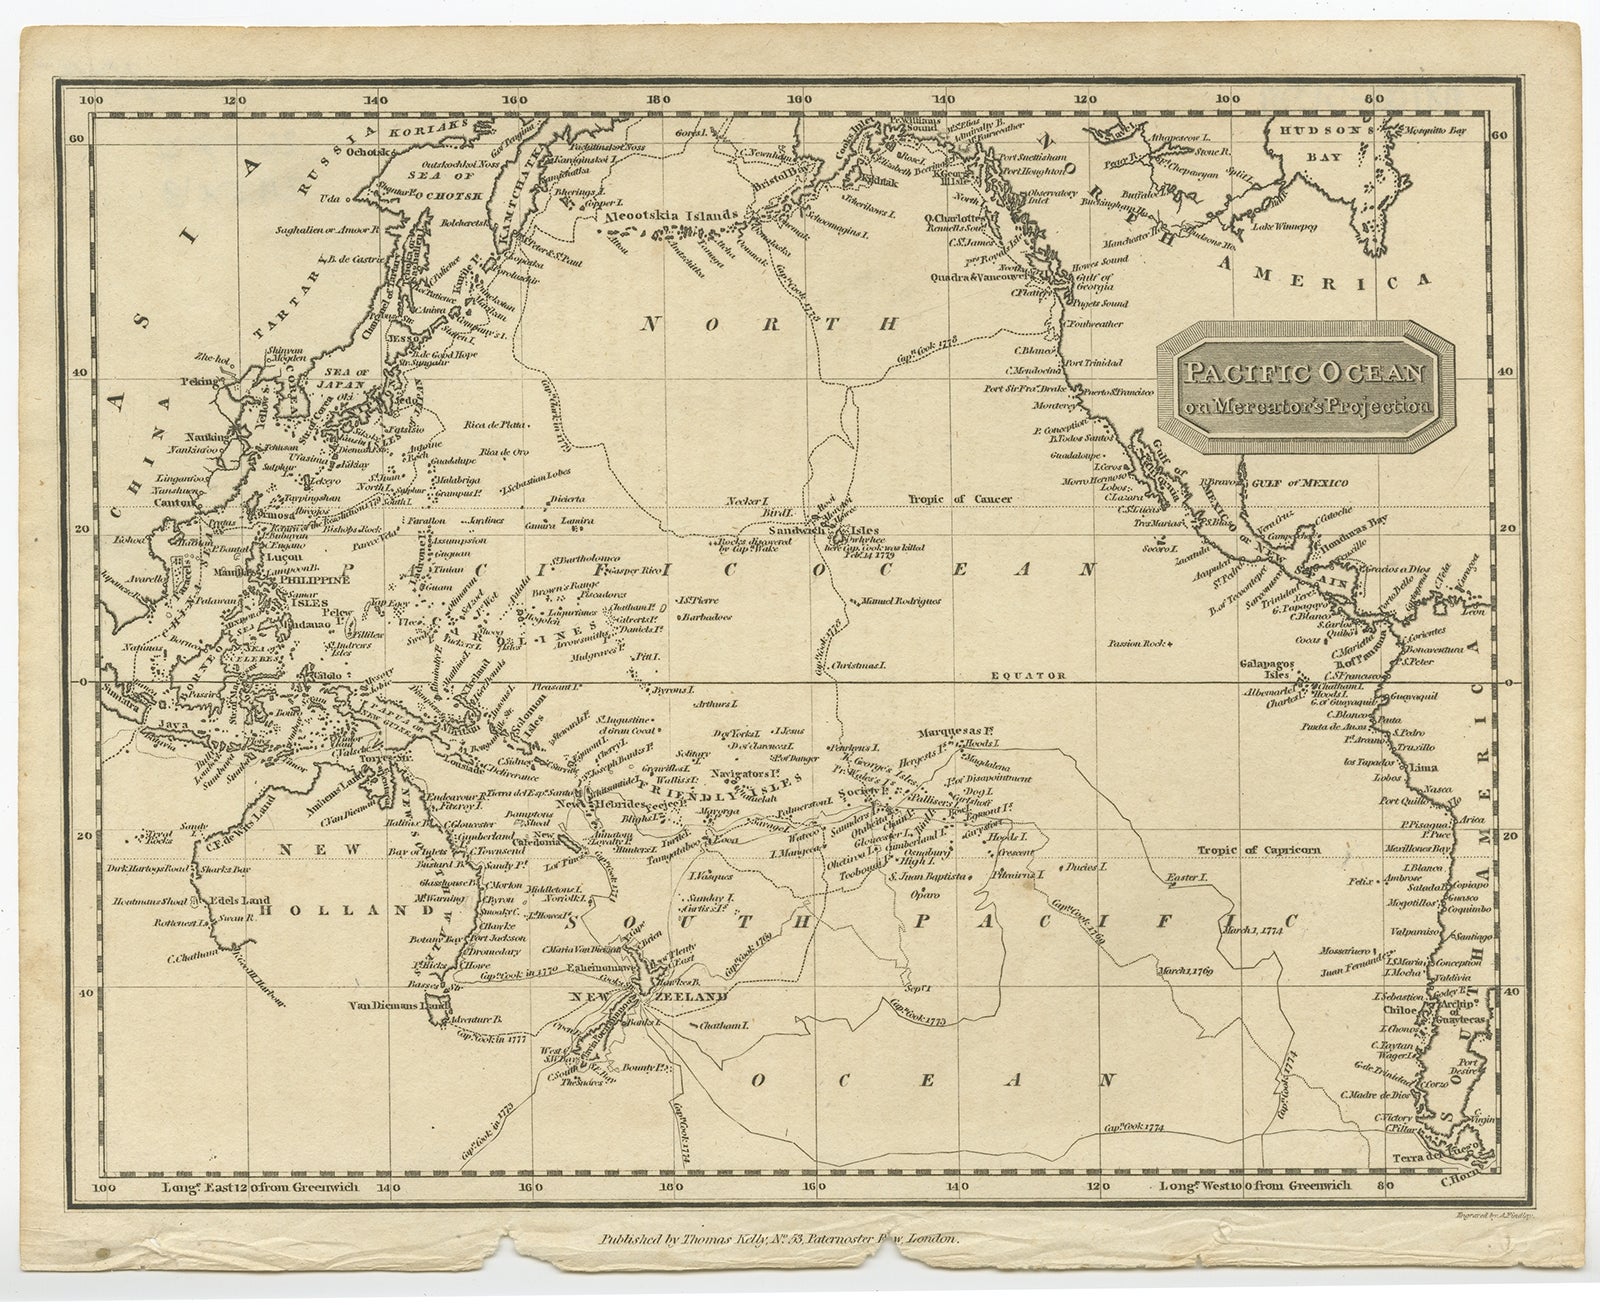 Antique map titled 'Pacific Ocean on Mercator's Projection'. Old map showing Captain Cook's voyages between 1769 and 1779. The southern part of Australia is not shown on this map. Originates from 'A New And Complete System Of Universal Geography